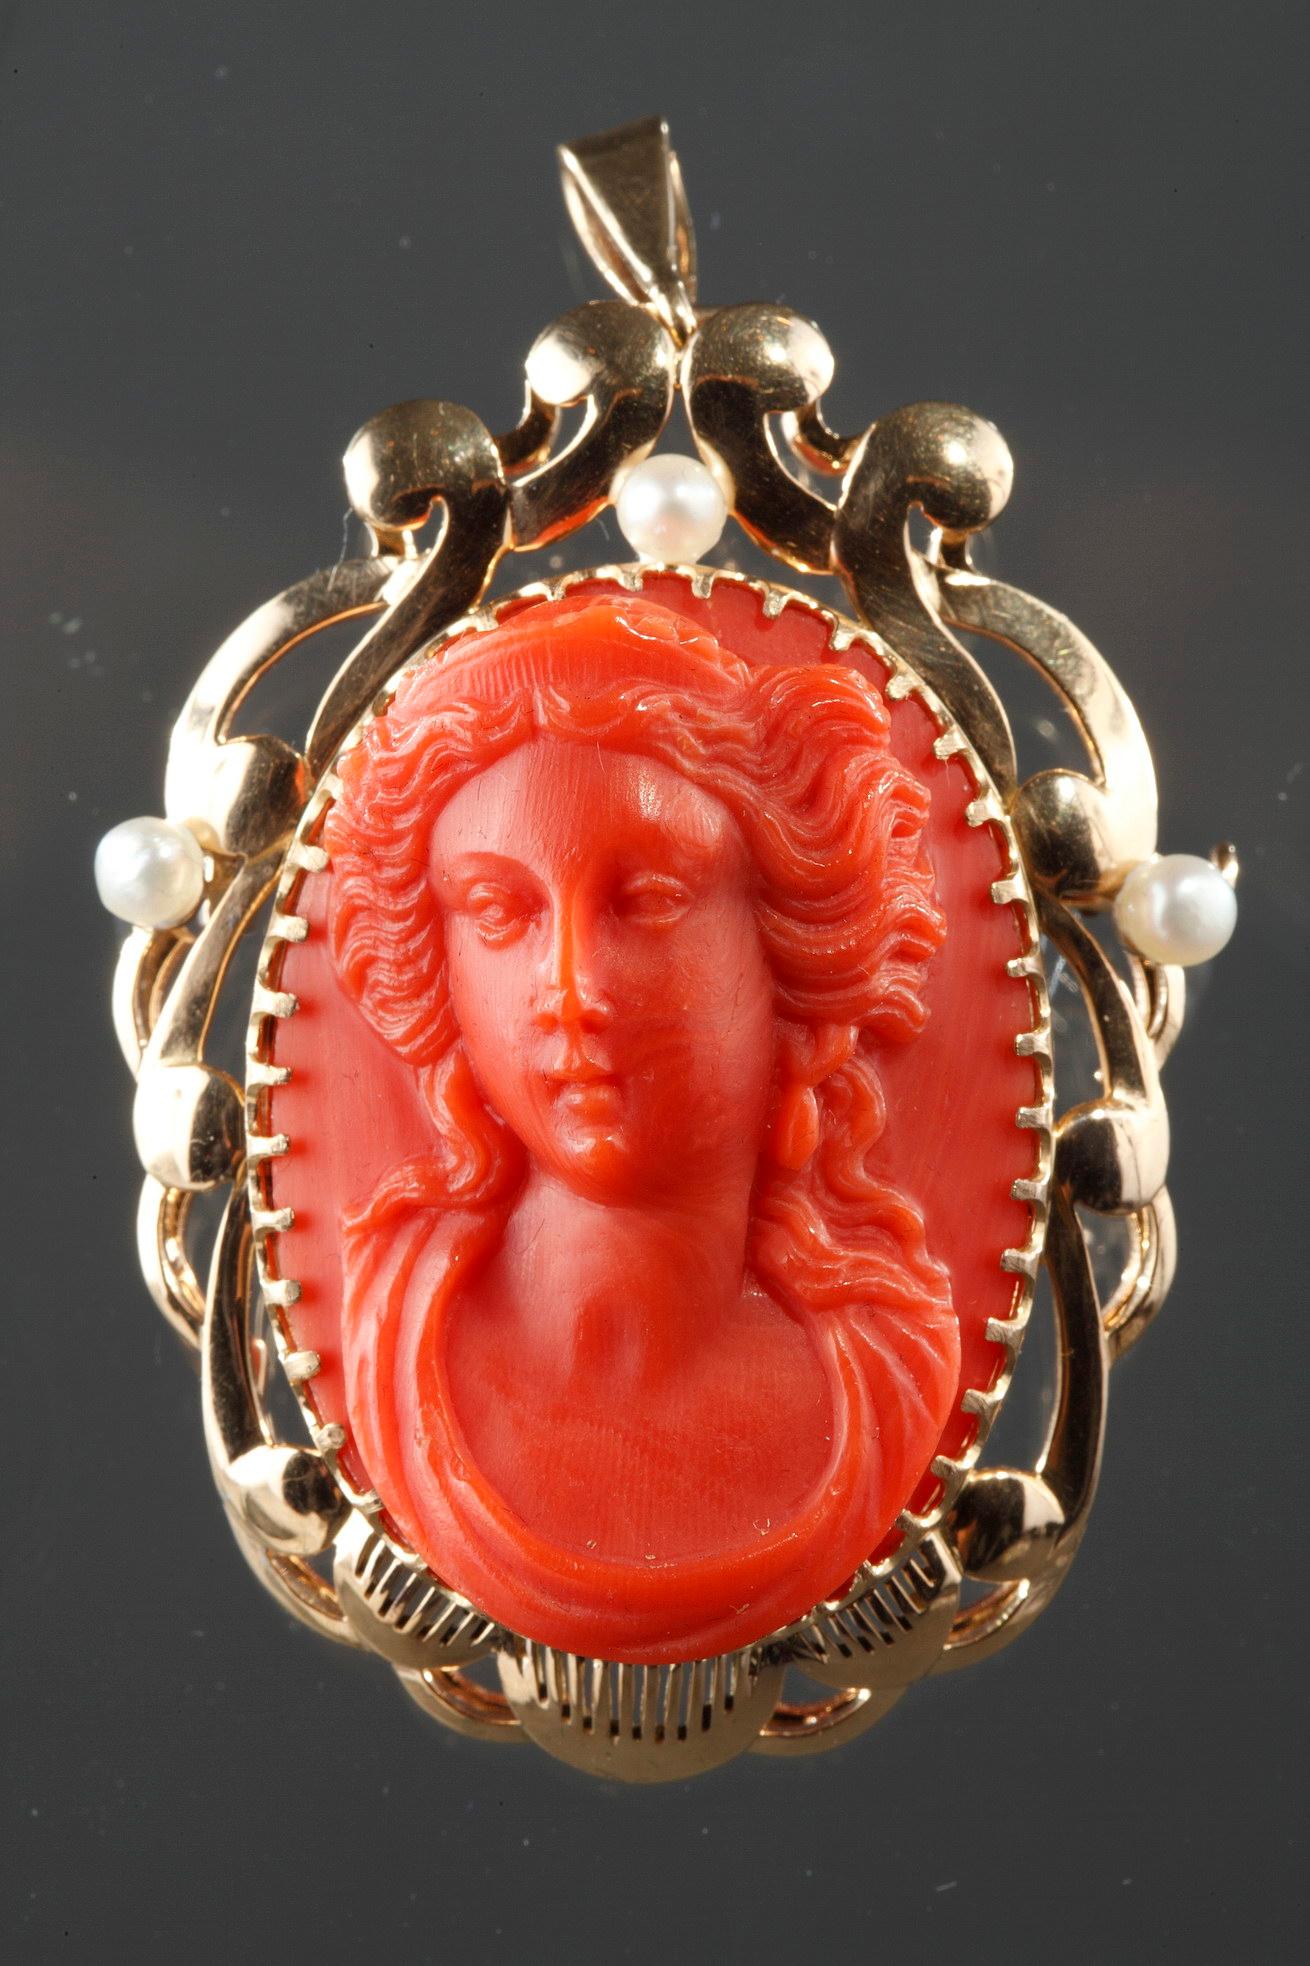 19th century oval brooch-pendant decorated with a cameo depicting a young woman in Renaissance taste. Gold openwork mounts, heightened with pearls.
18 carat